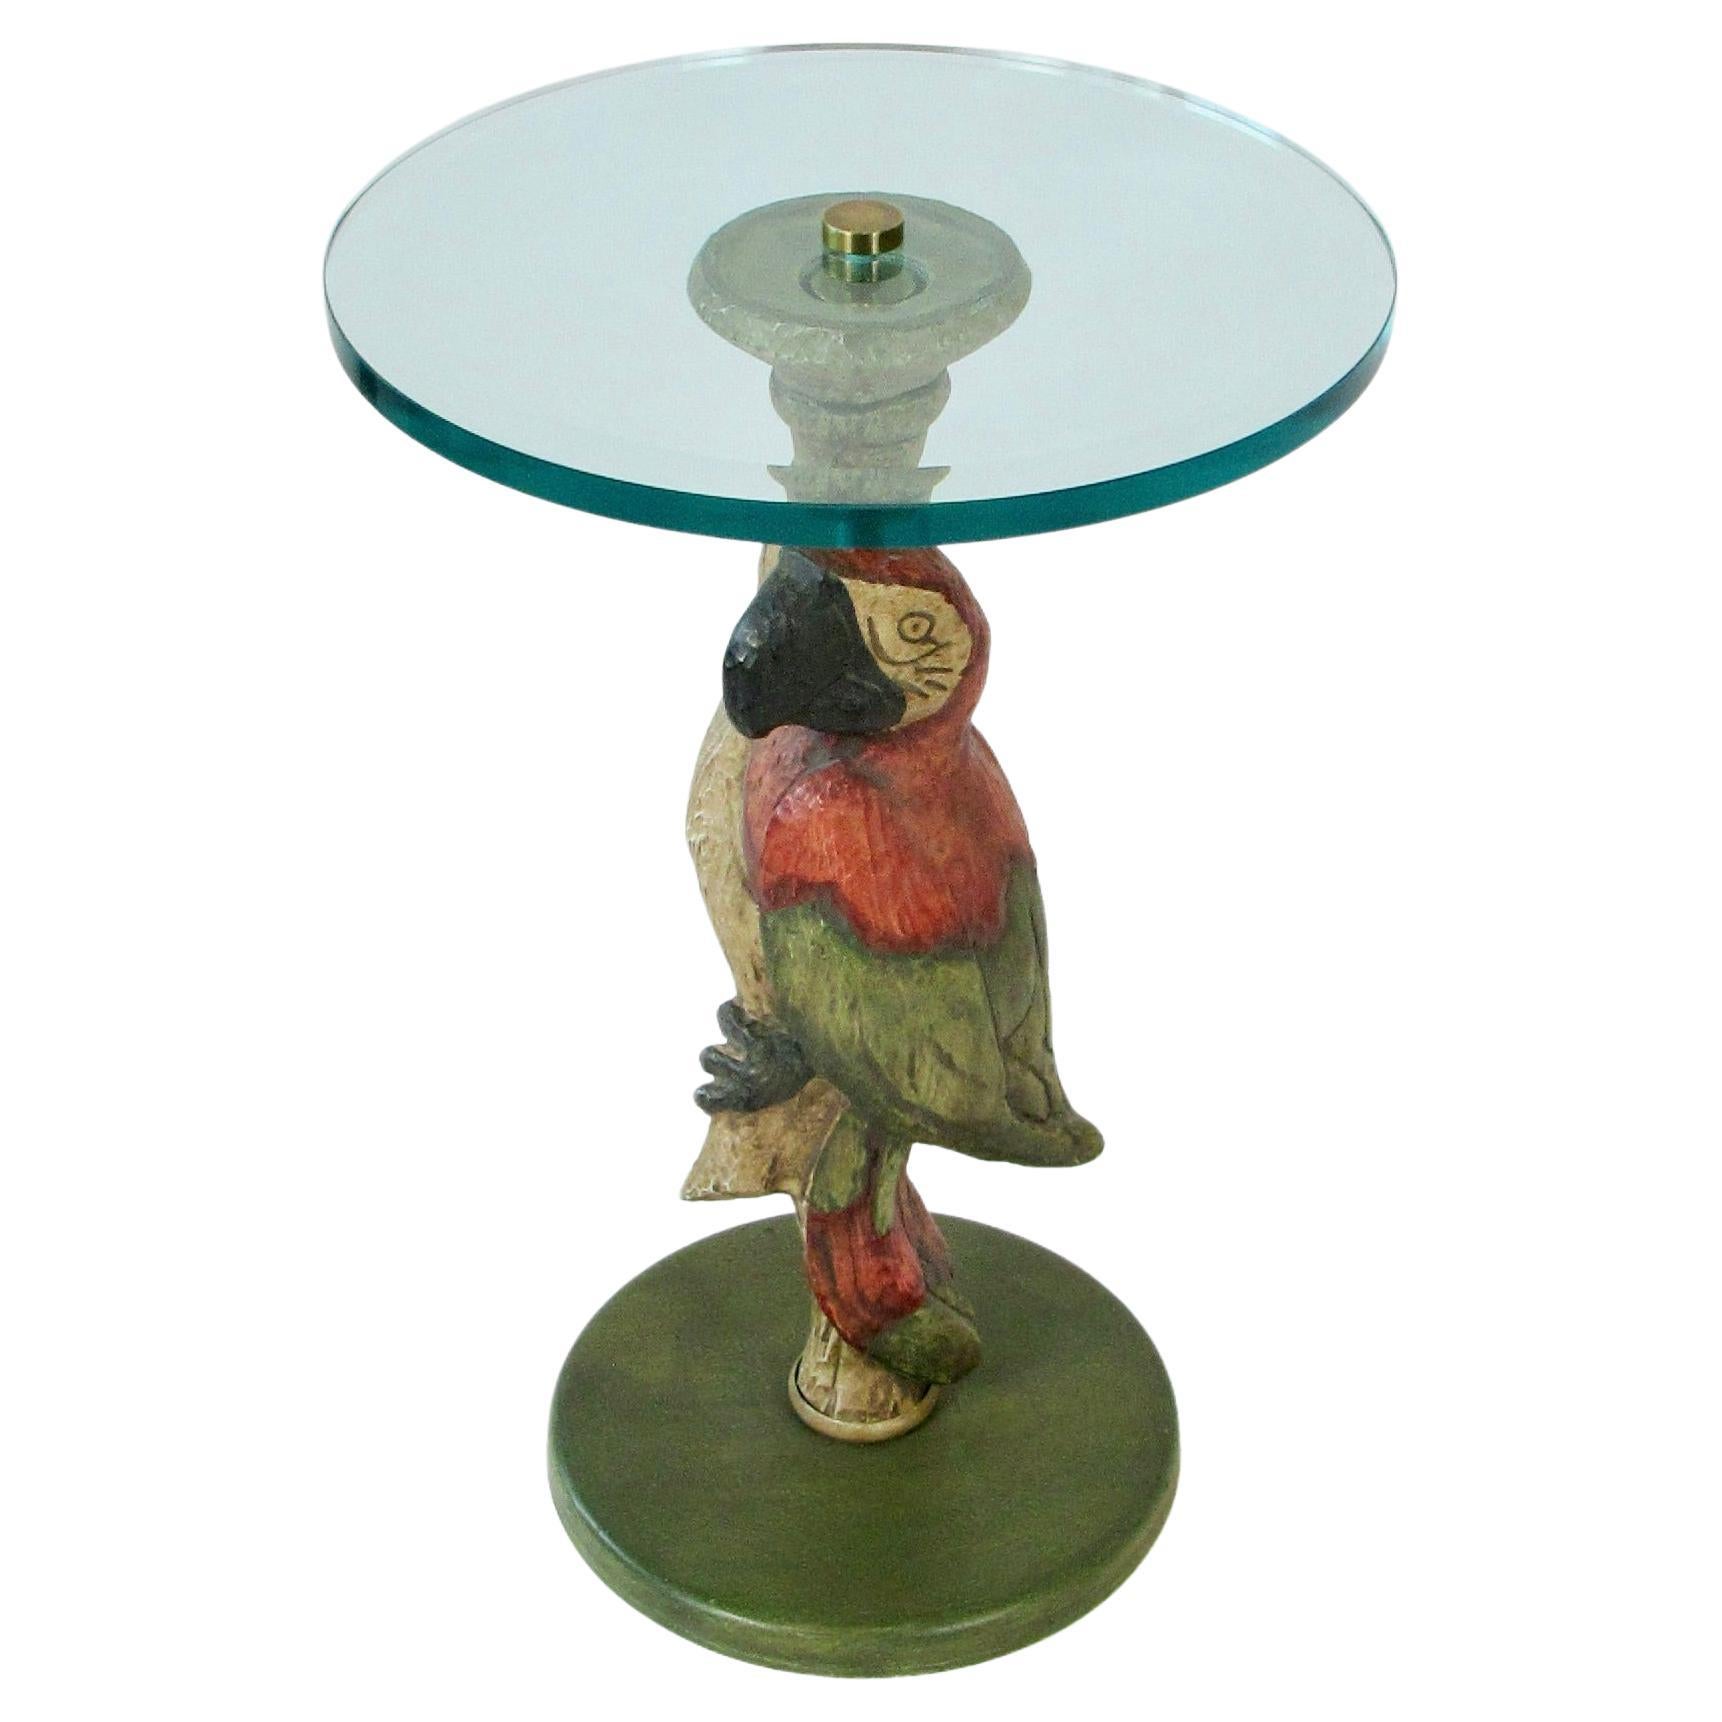 Whimsical Polly Want a Table Bevel Glass on Parrot Base Style of Maitland Smith For Sale